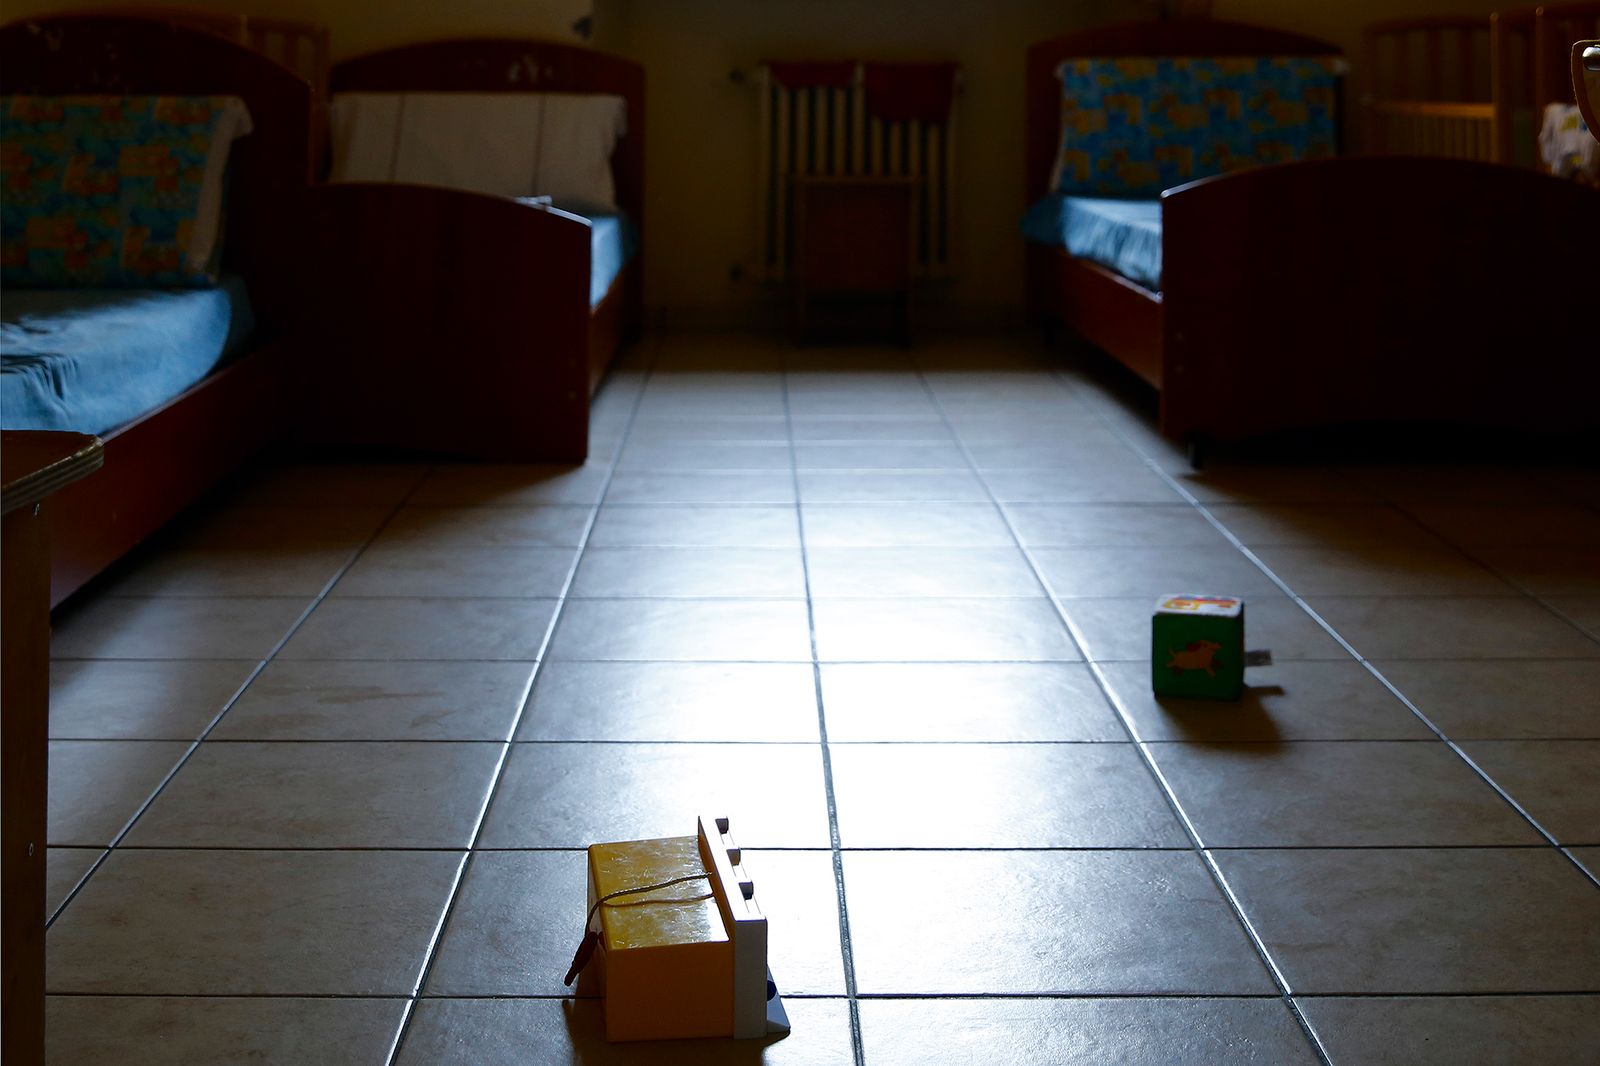 © Francesca Pompei - Toys on the floor  in a cell of the kindergarten area of the women's section of Rome's Rebibbia prison.